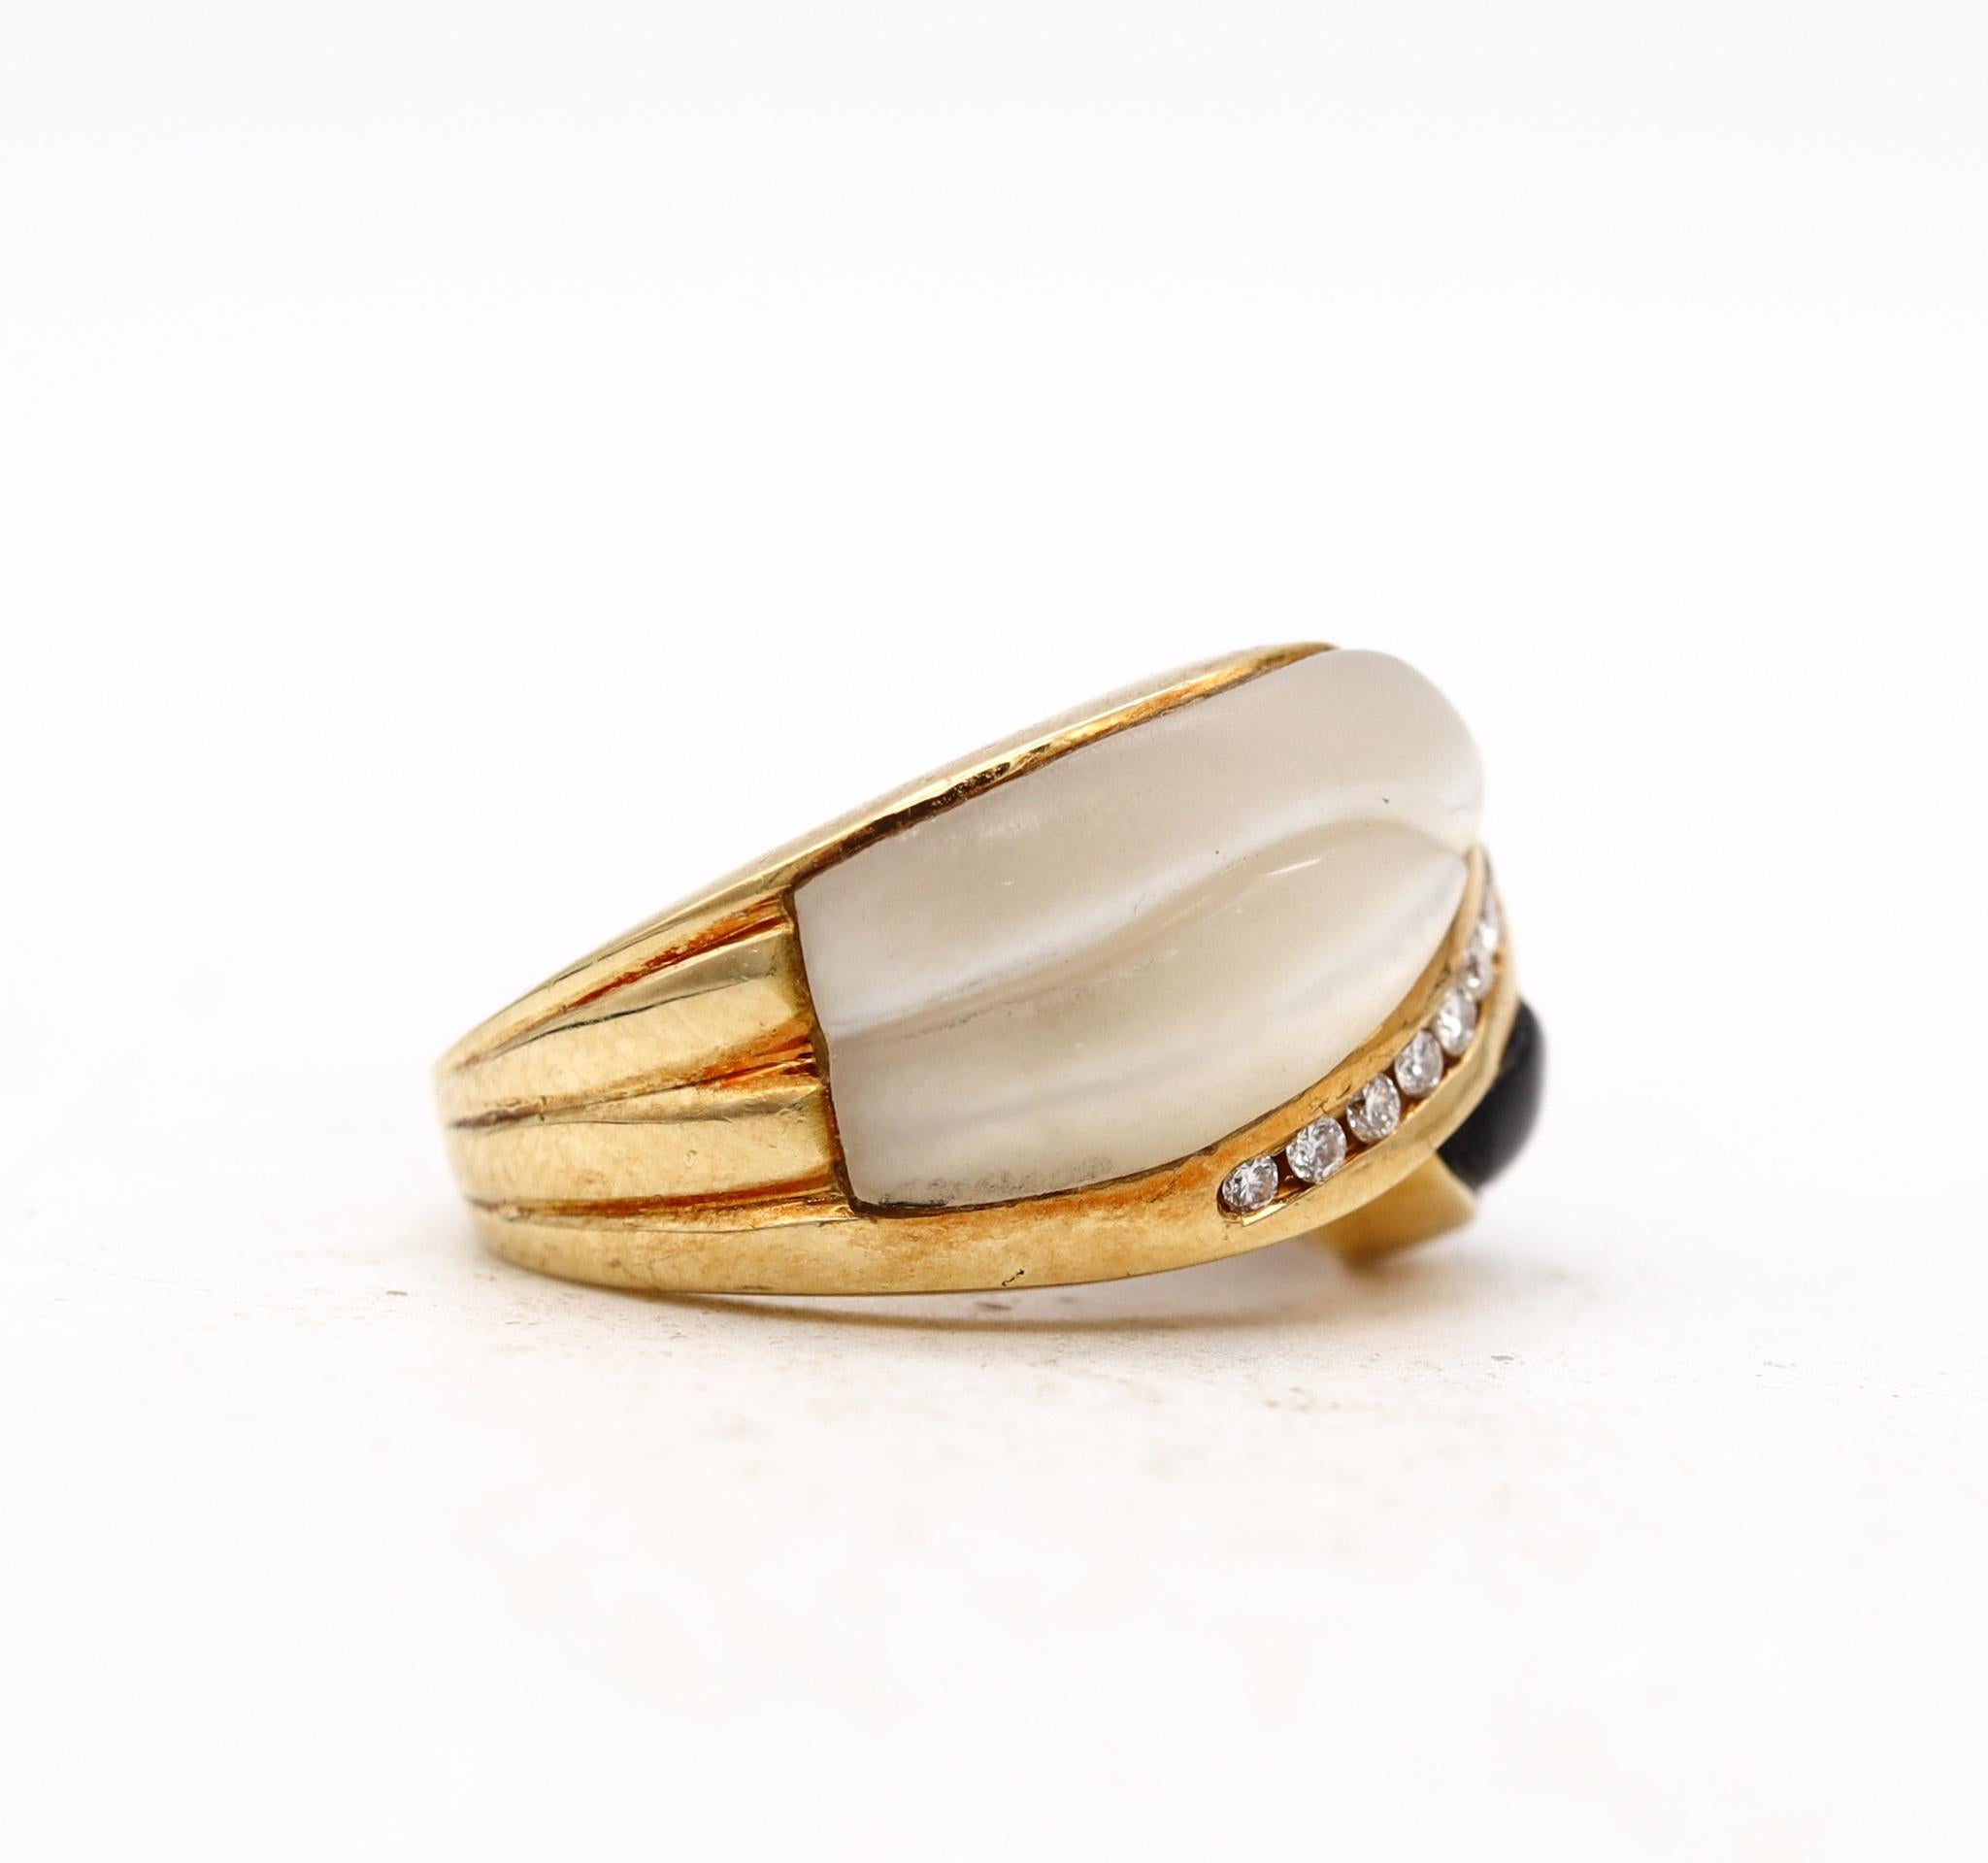 Denoir Paris Gem Set Ring 18Kt Yellow Gold With VS Diamonds Onyx And White Nacre In Excellent Condition For Sale In Miami, FL